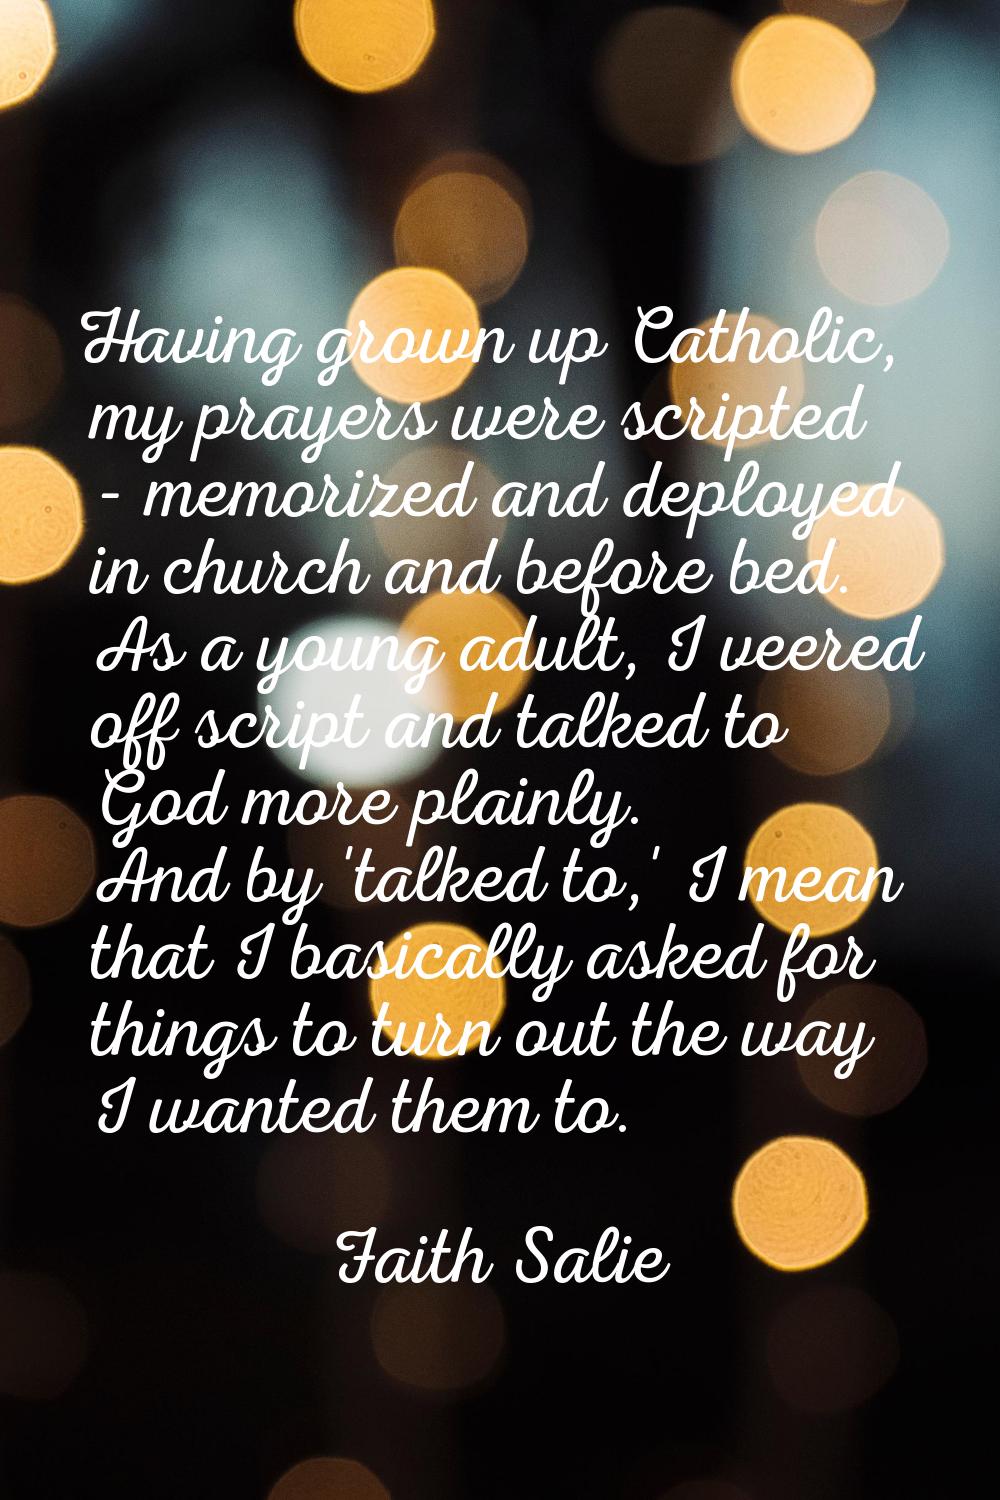 Having grown up Catholic, my prayers were scripted - memorized and deployed in church and before be